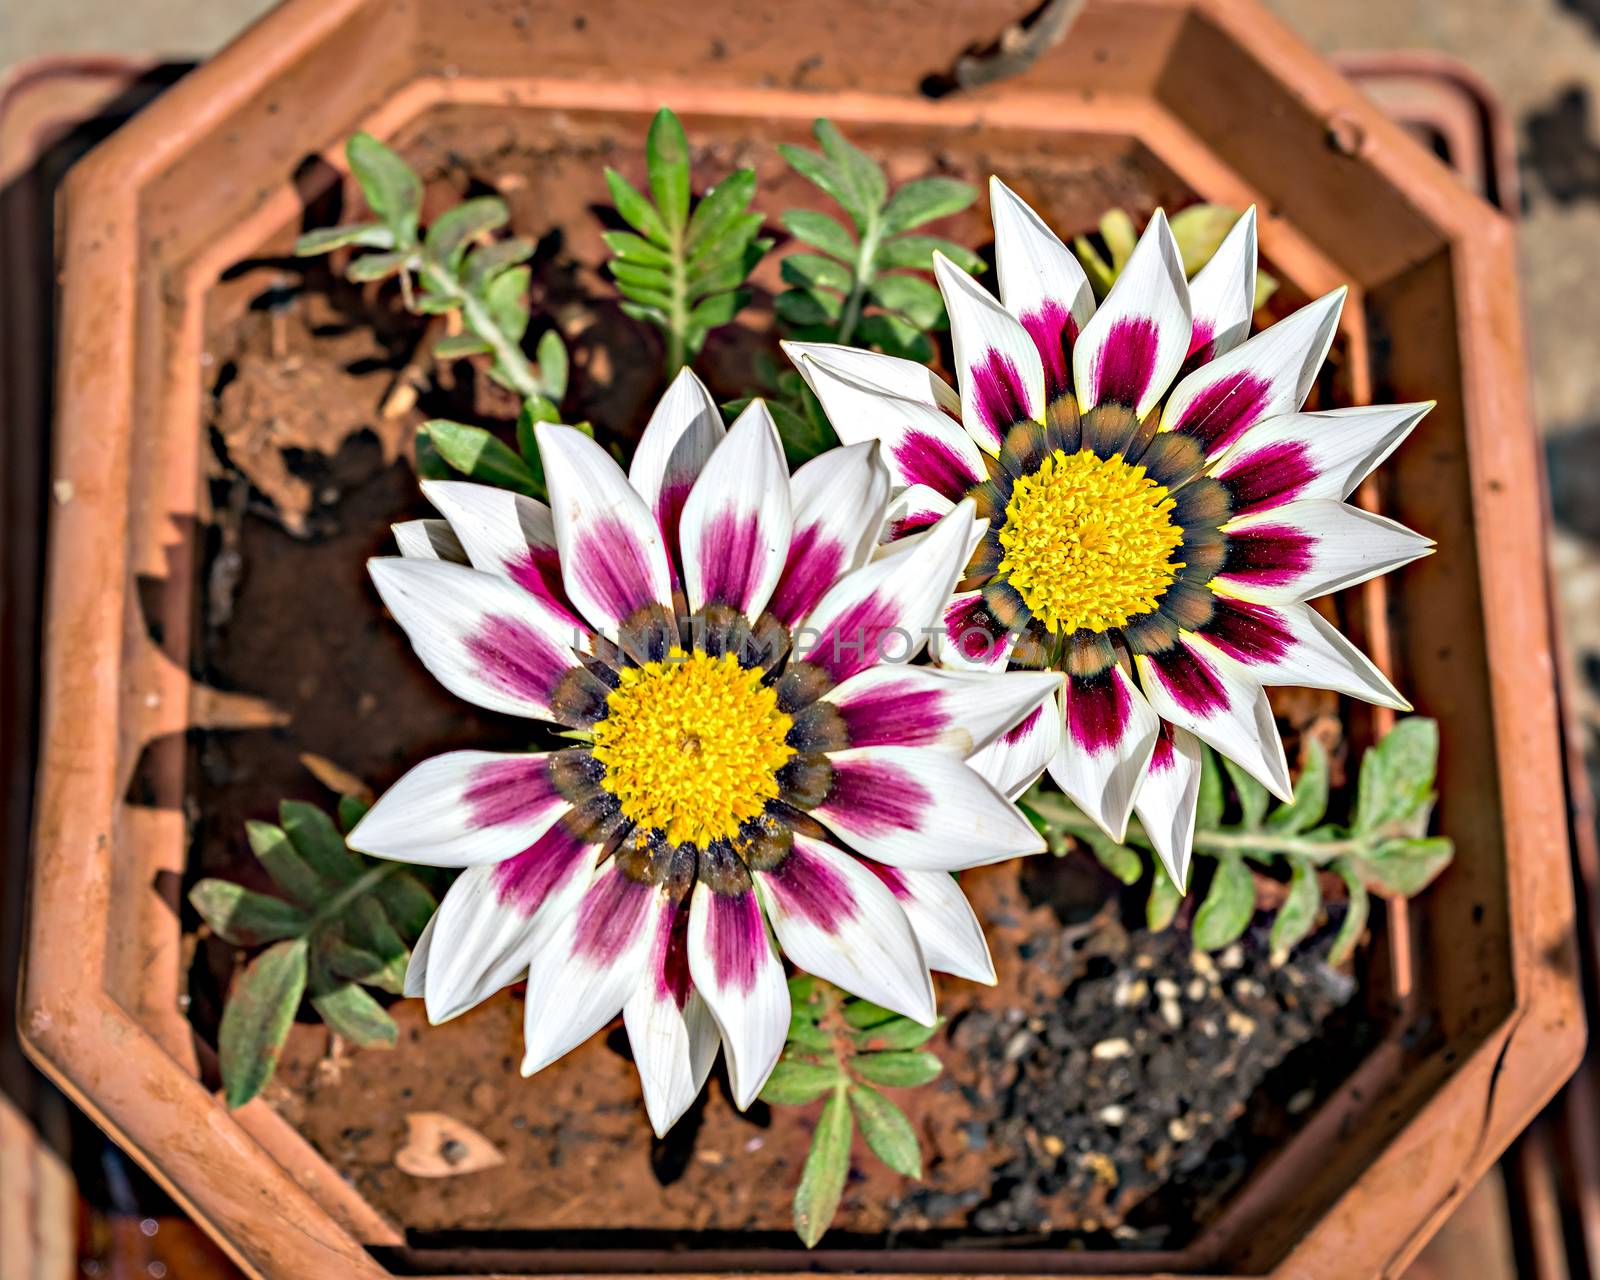 Isolated, close-up image of two white & pink Gazania flowers with yellow center. by lalam